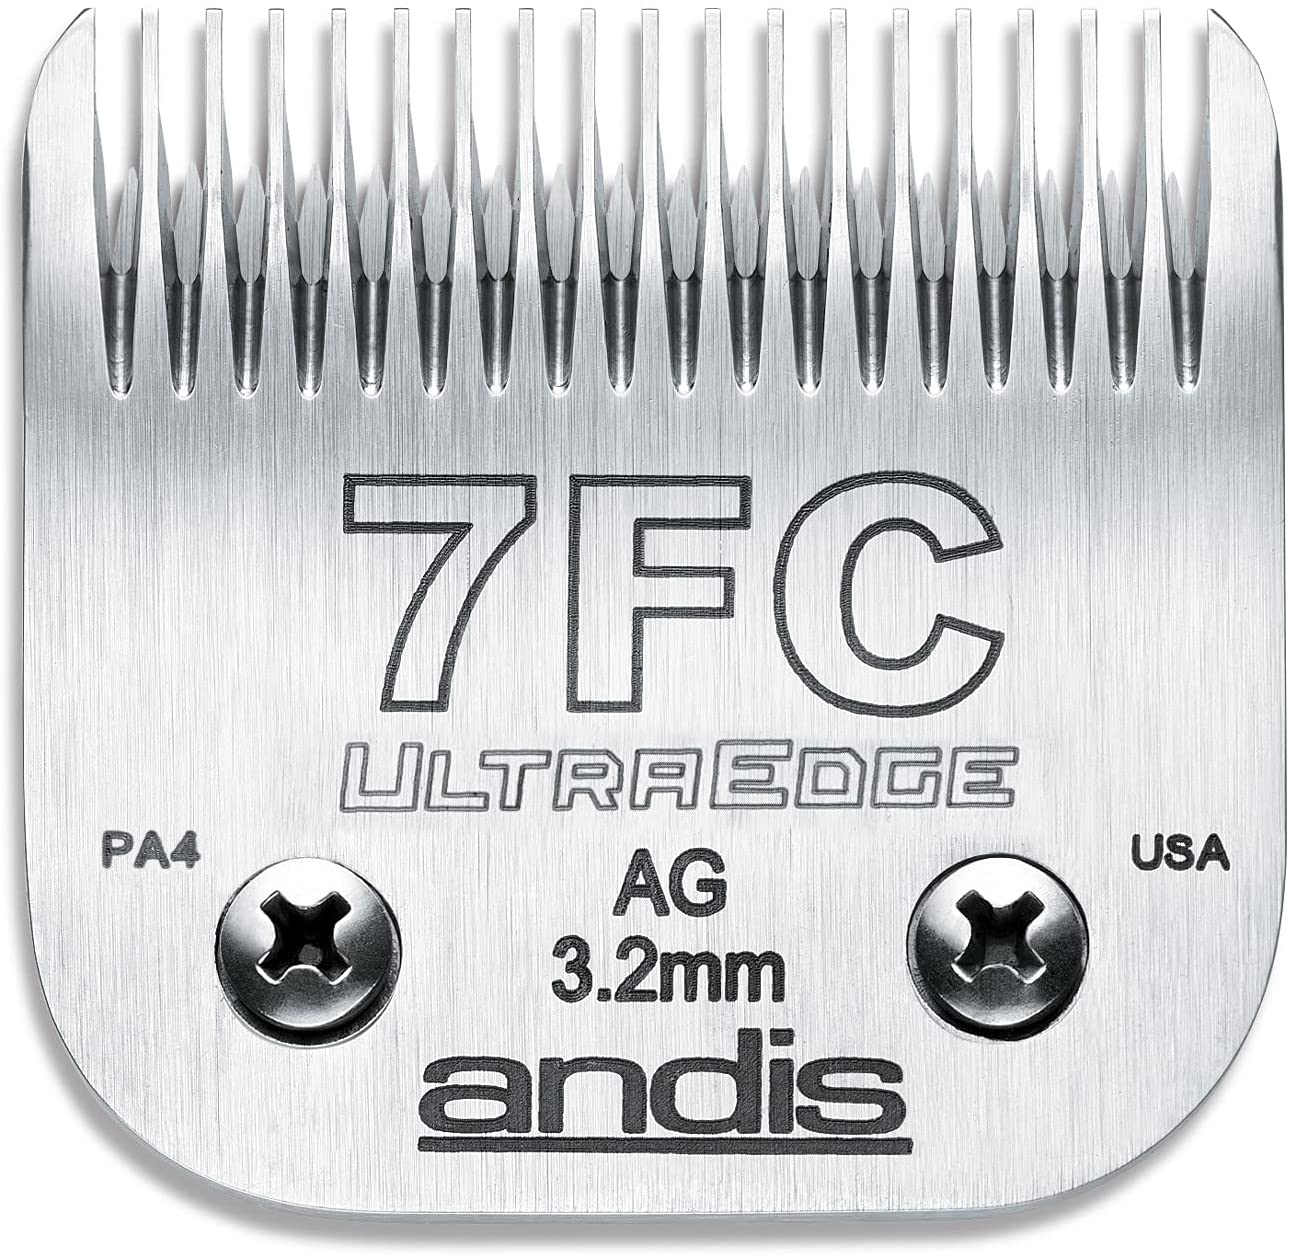 ANDIS ULTRAEDGE SIZE 7FC / LEAVES HAIR 1/8" - 3.2MM 9344